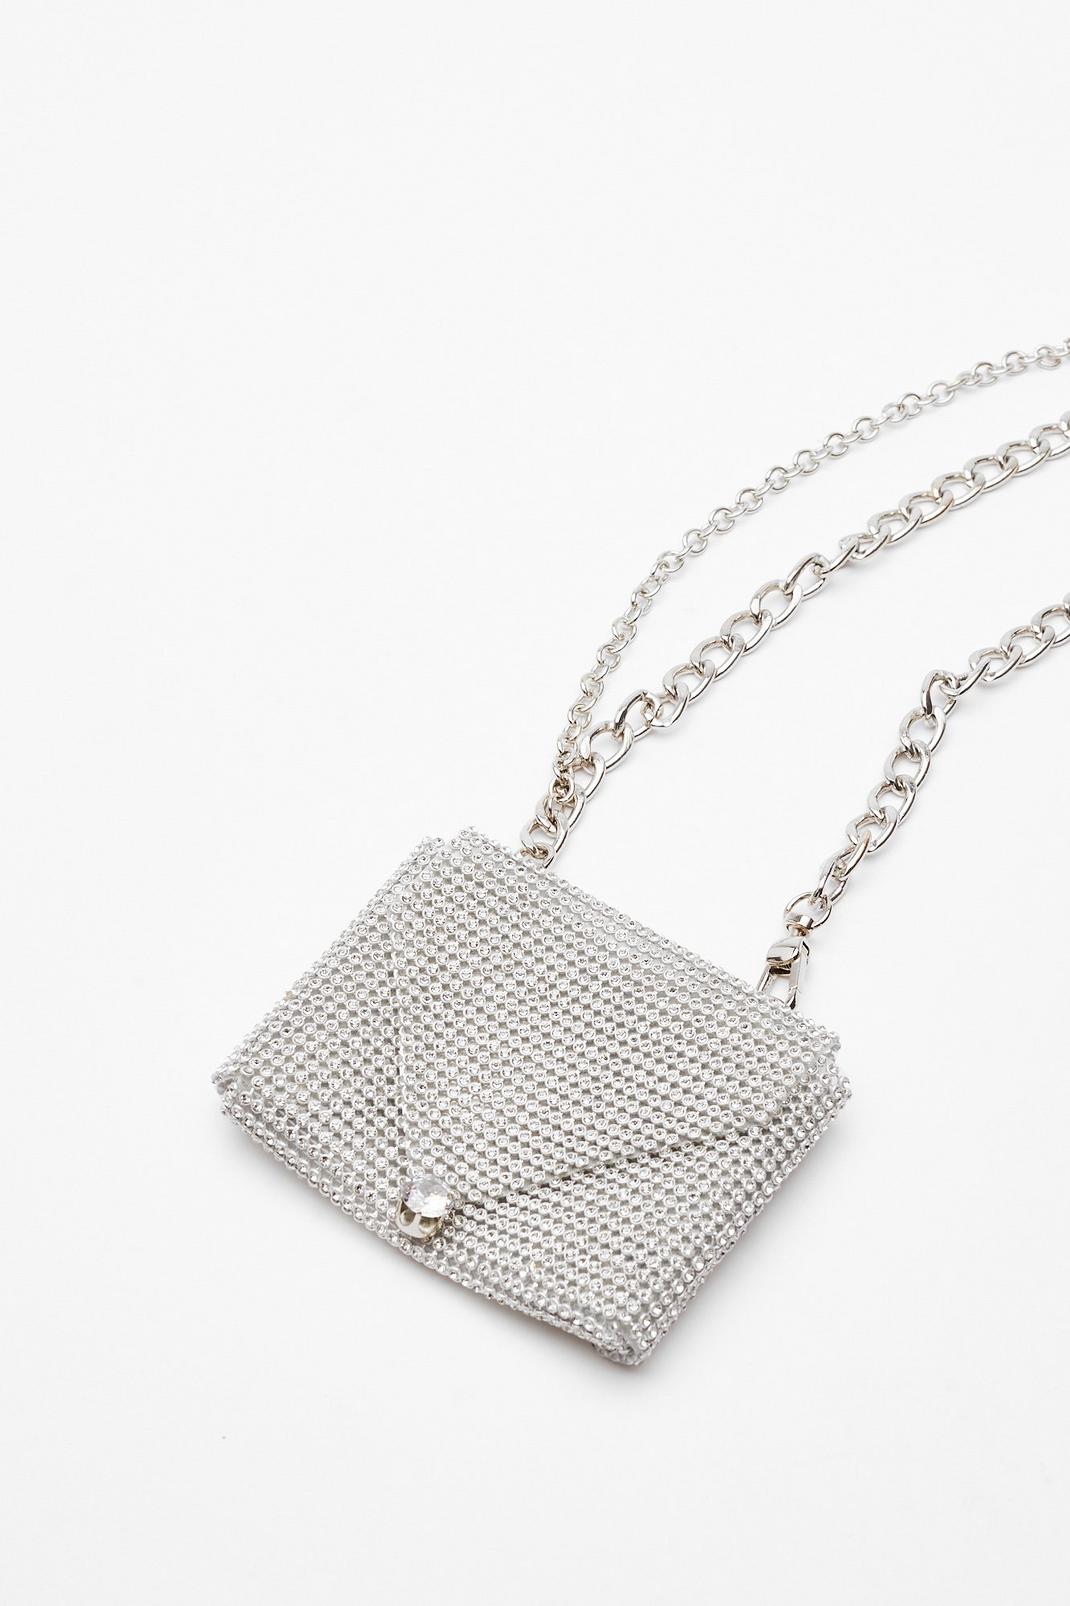 Sac ceinture WANT style enveloppe à strass, Silver image number 1